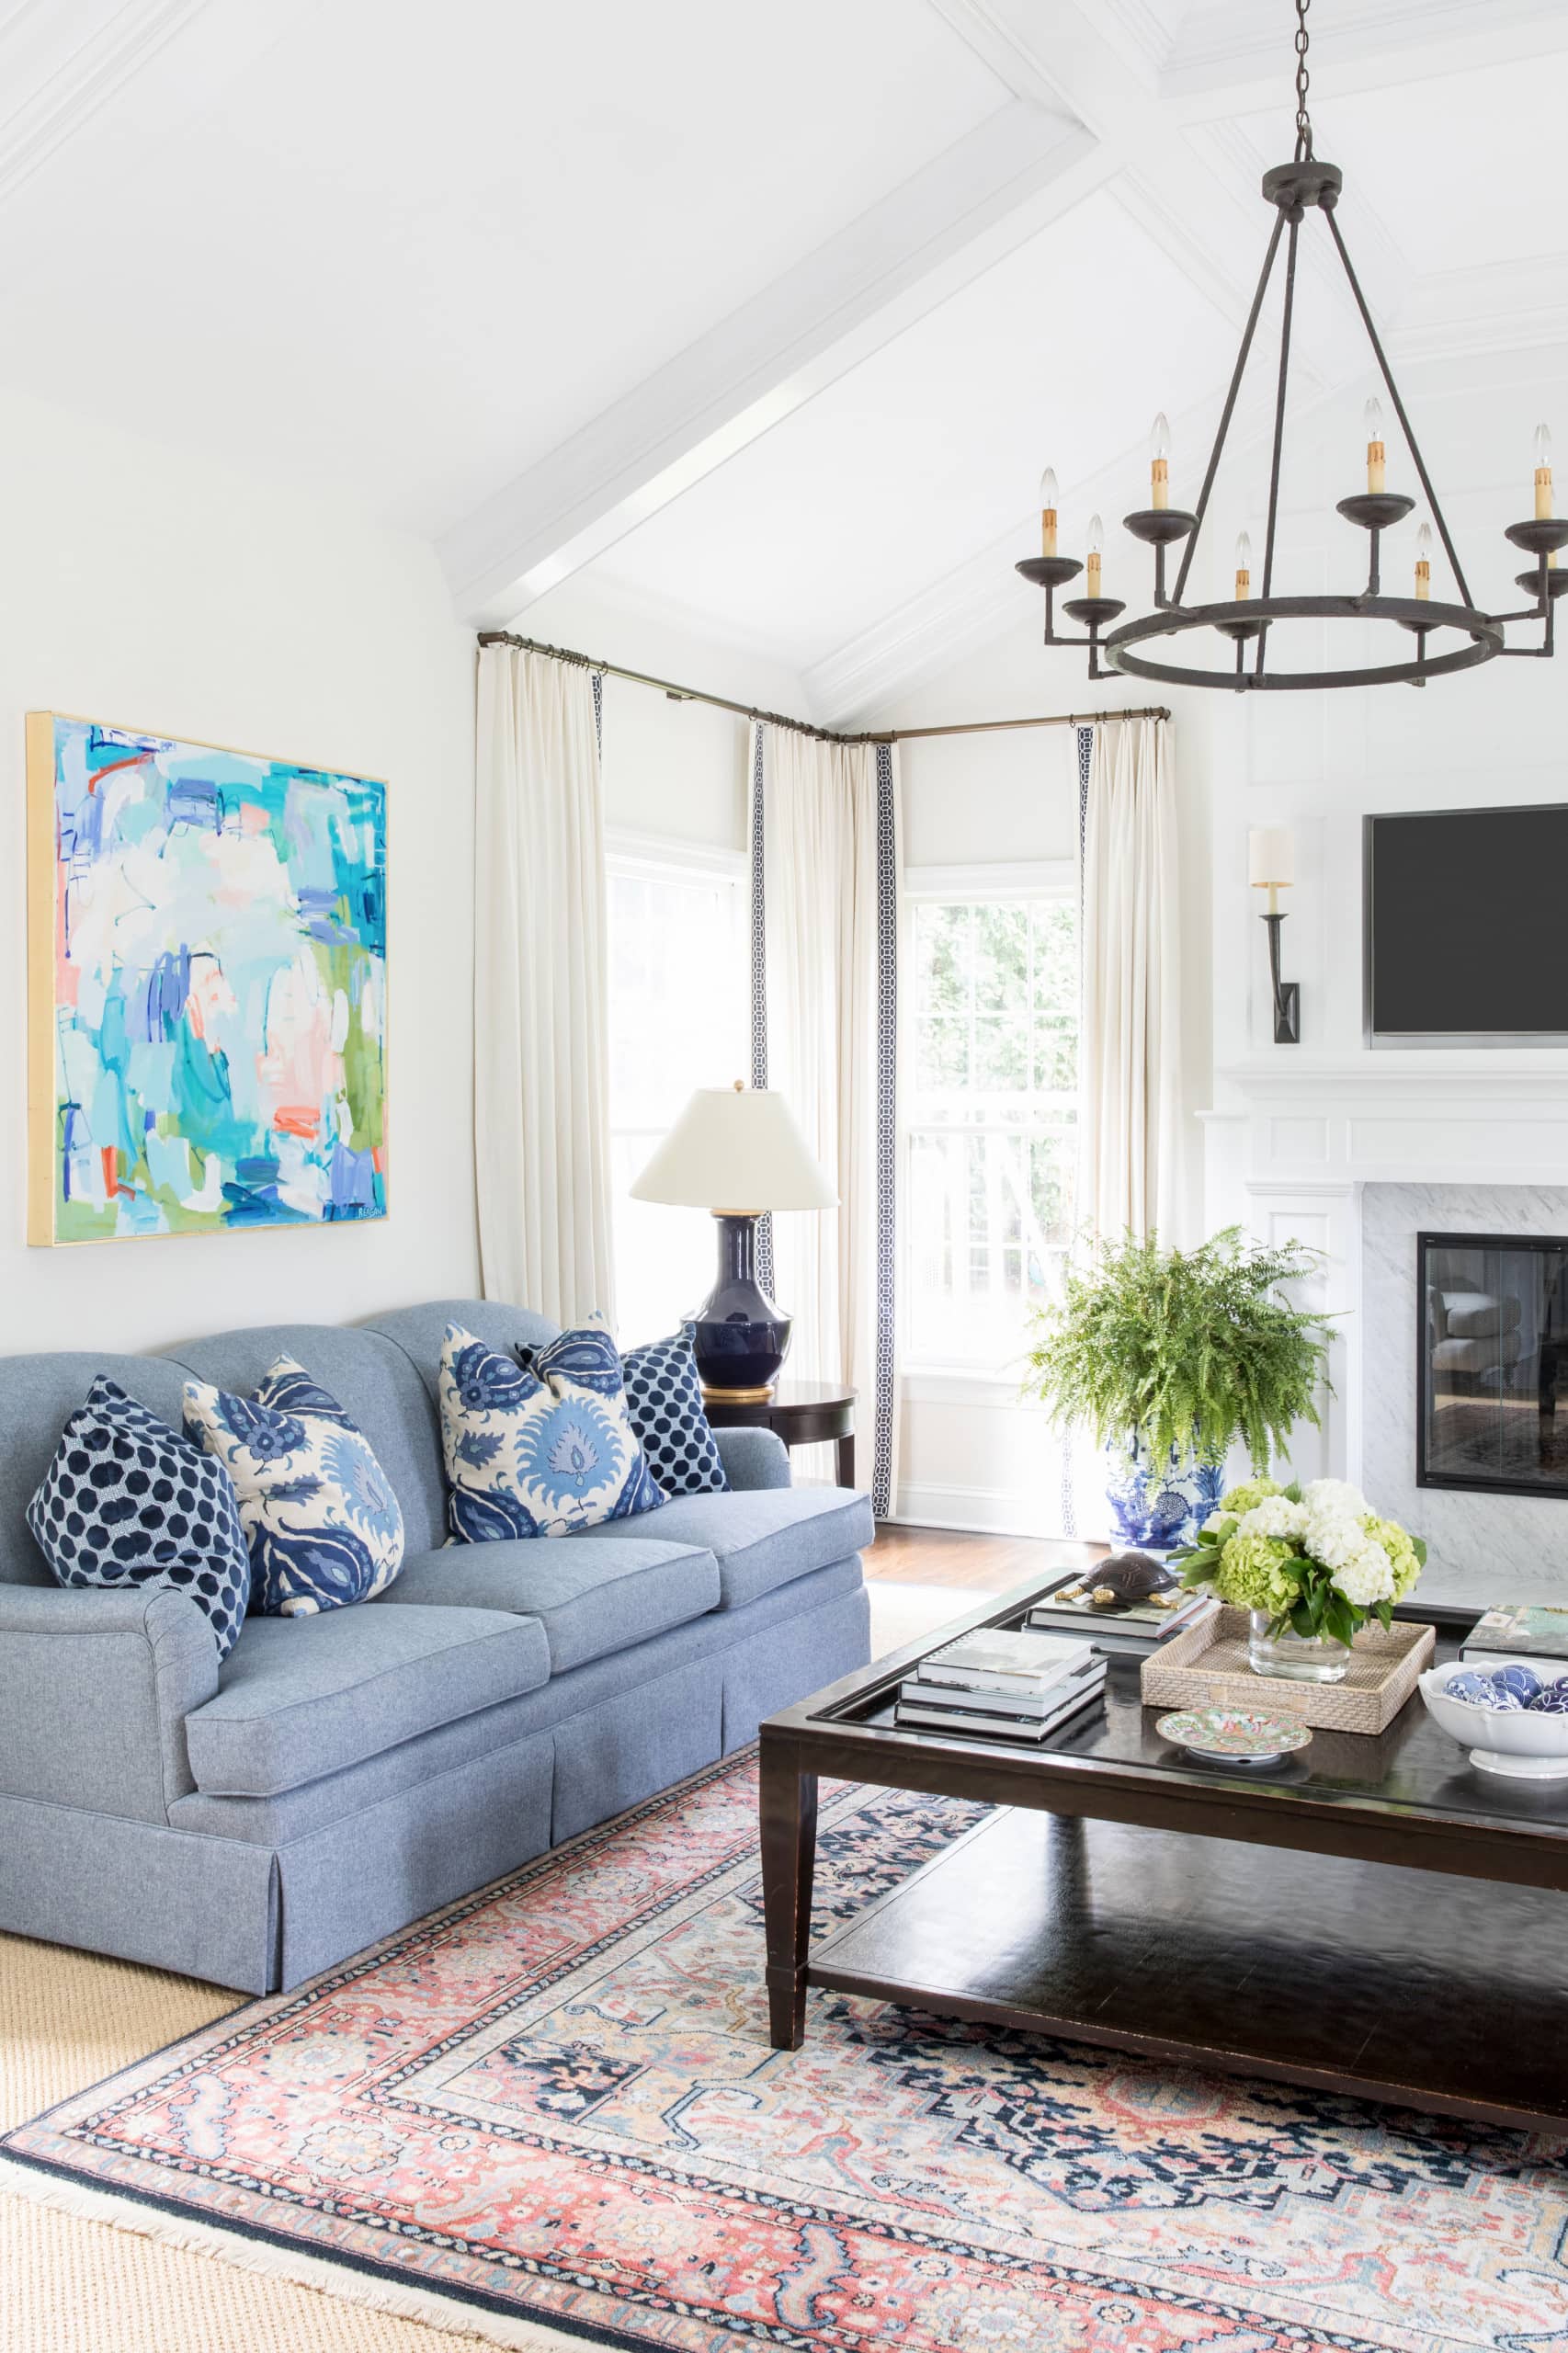 home tour family room idea featuring colorful elegance style with blue and green colors,